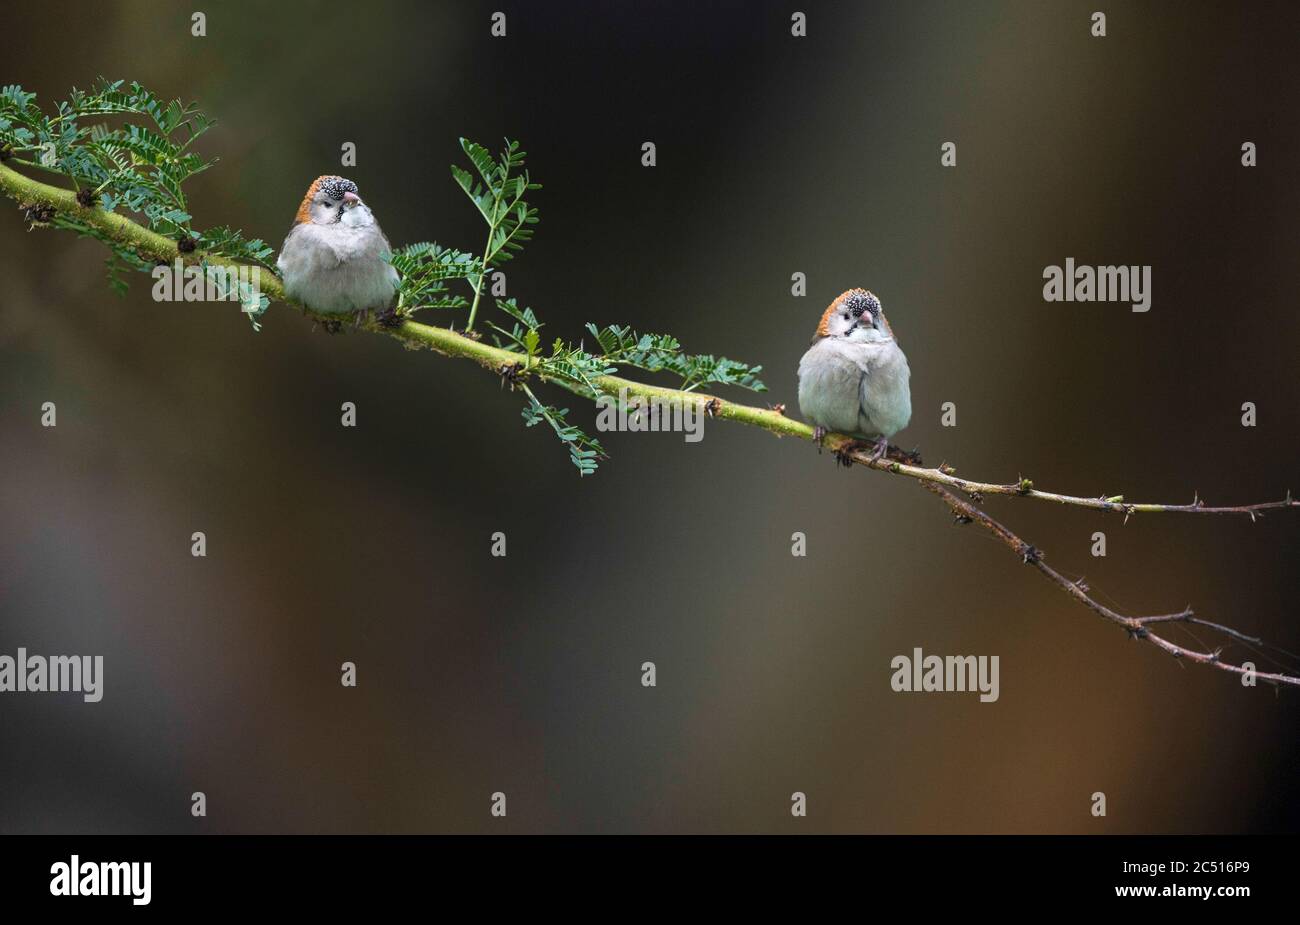 Two Speckled fronted Sparrows on branch, Sporopipes frontalis,  Kenya, Africa Stock Photo